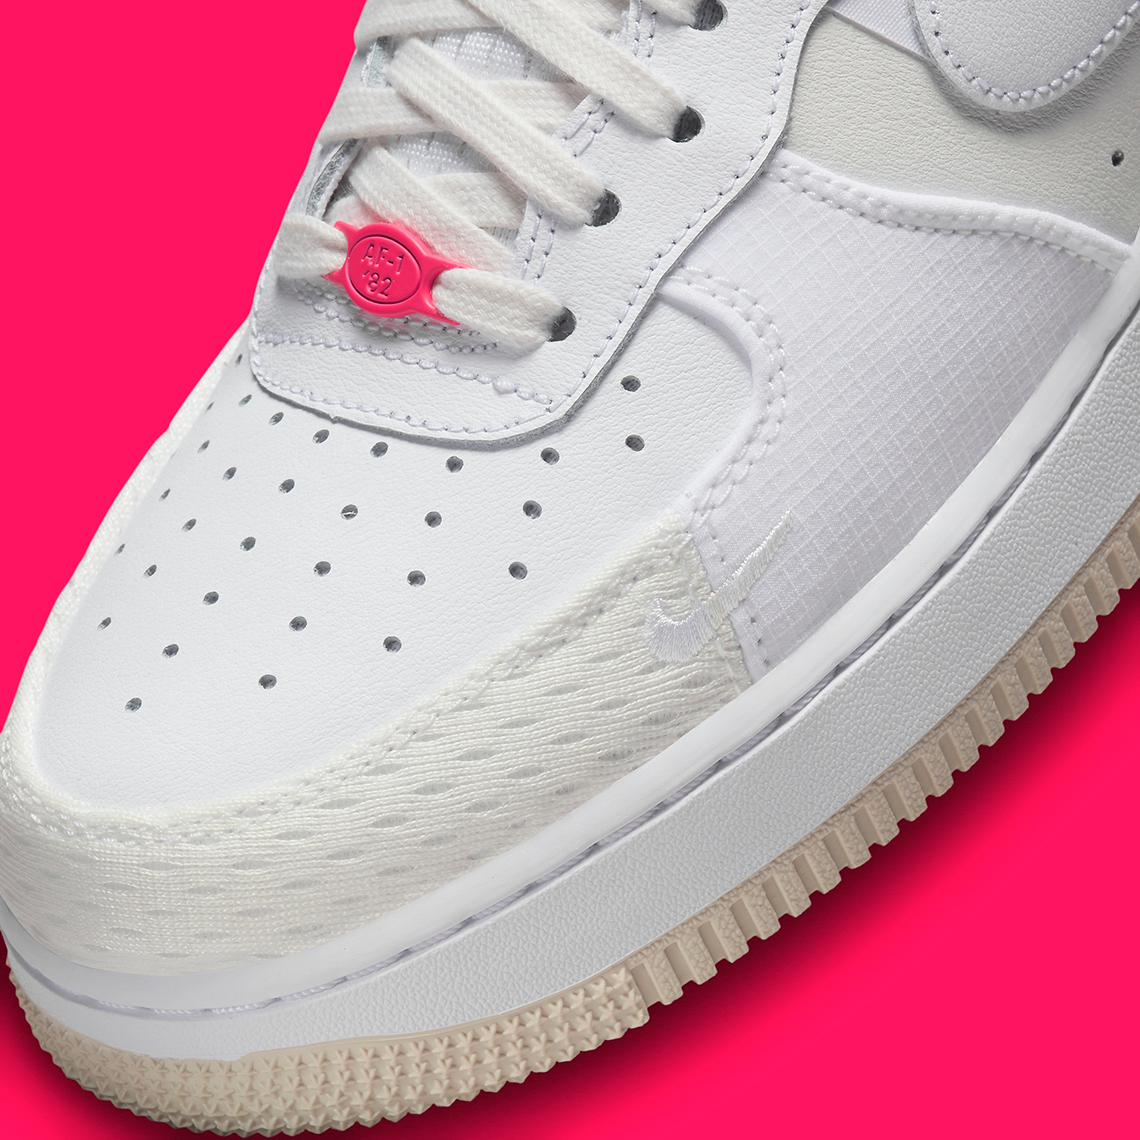 nike air force 1 low pink bling release date 2